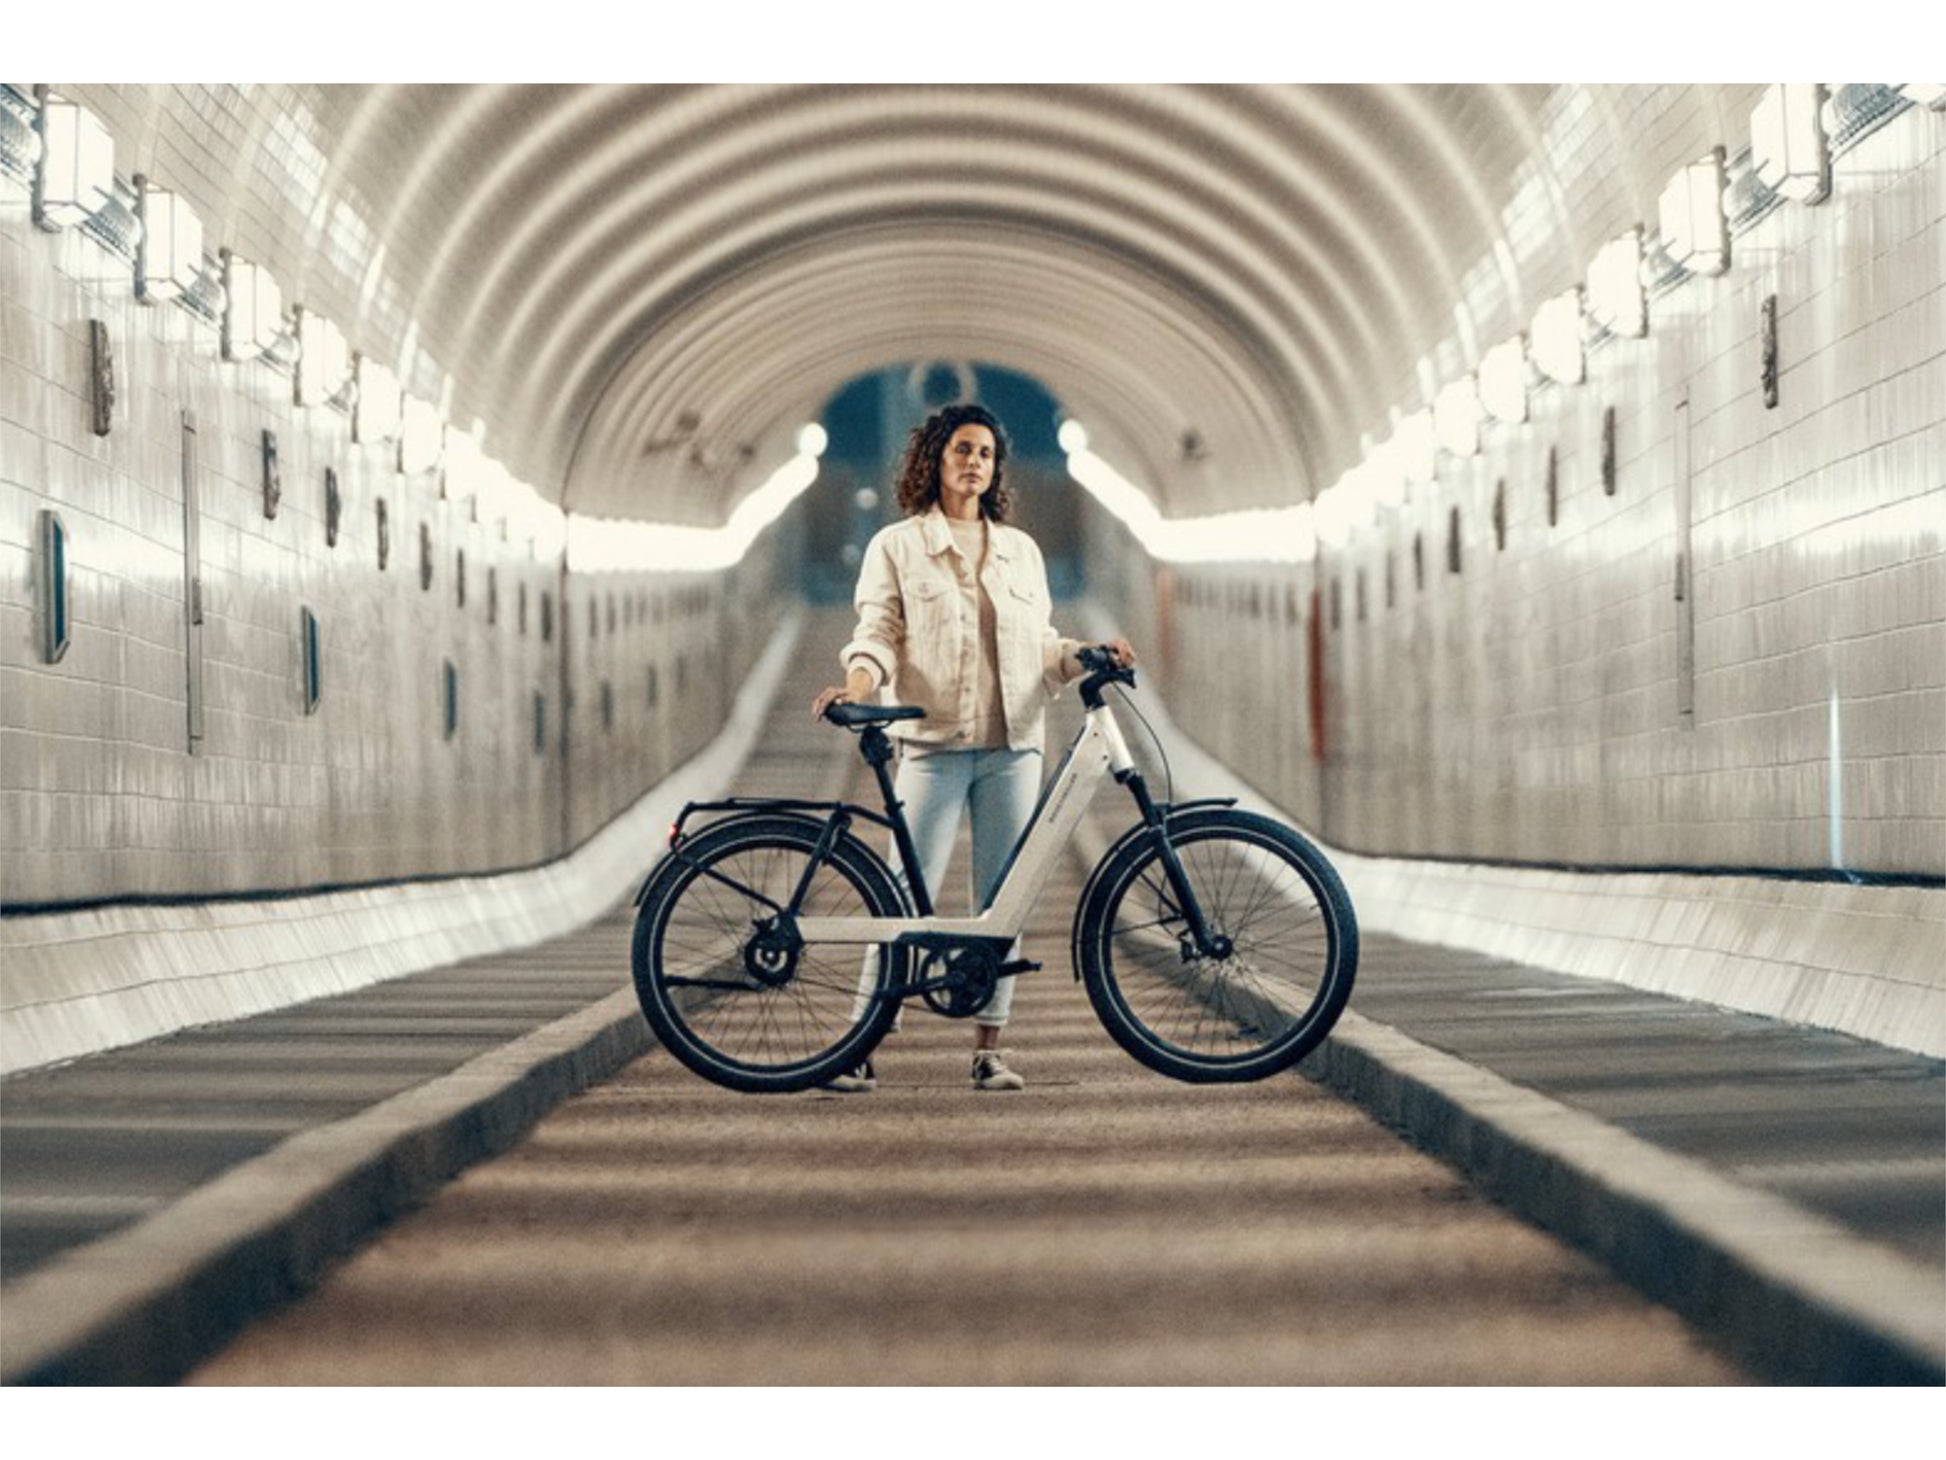 Riese and Muller Nevo GT Vario HS emtb hardtail woman in city tunnel bike path